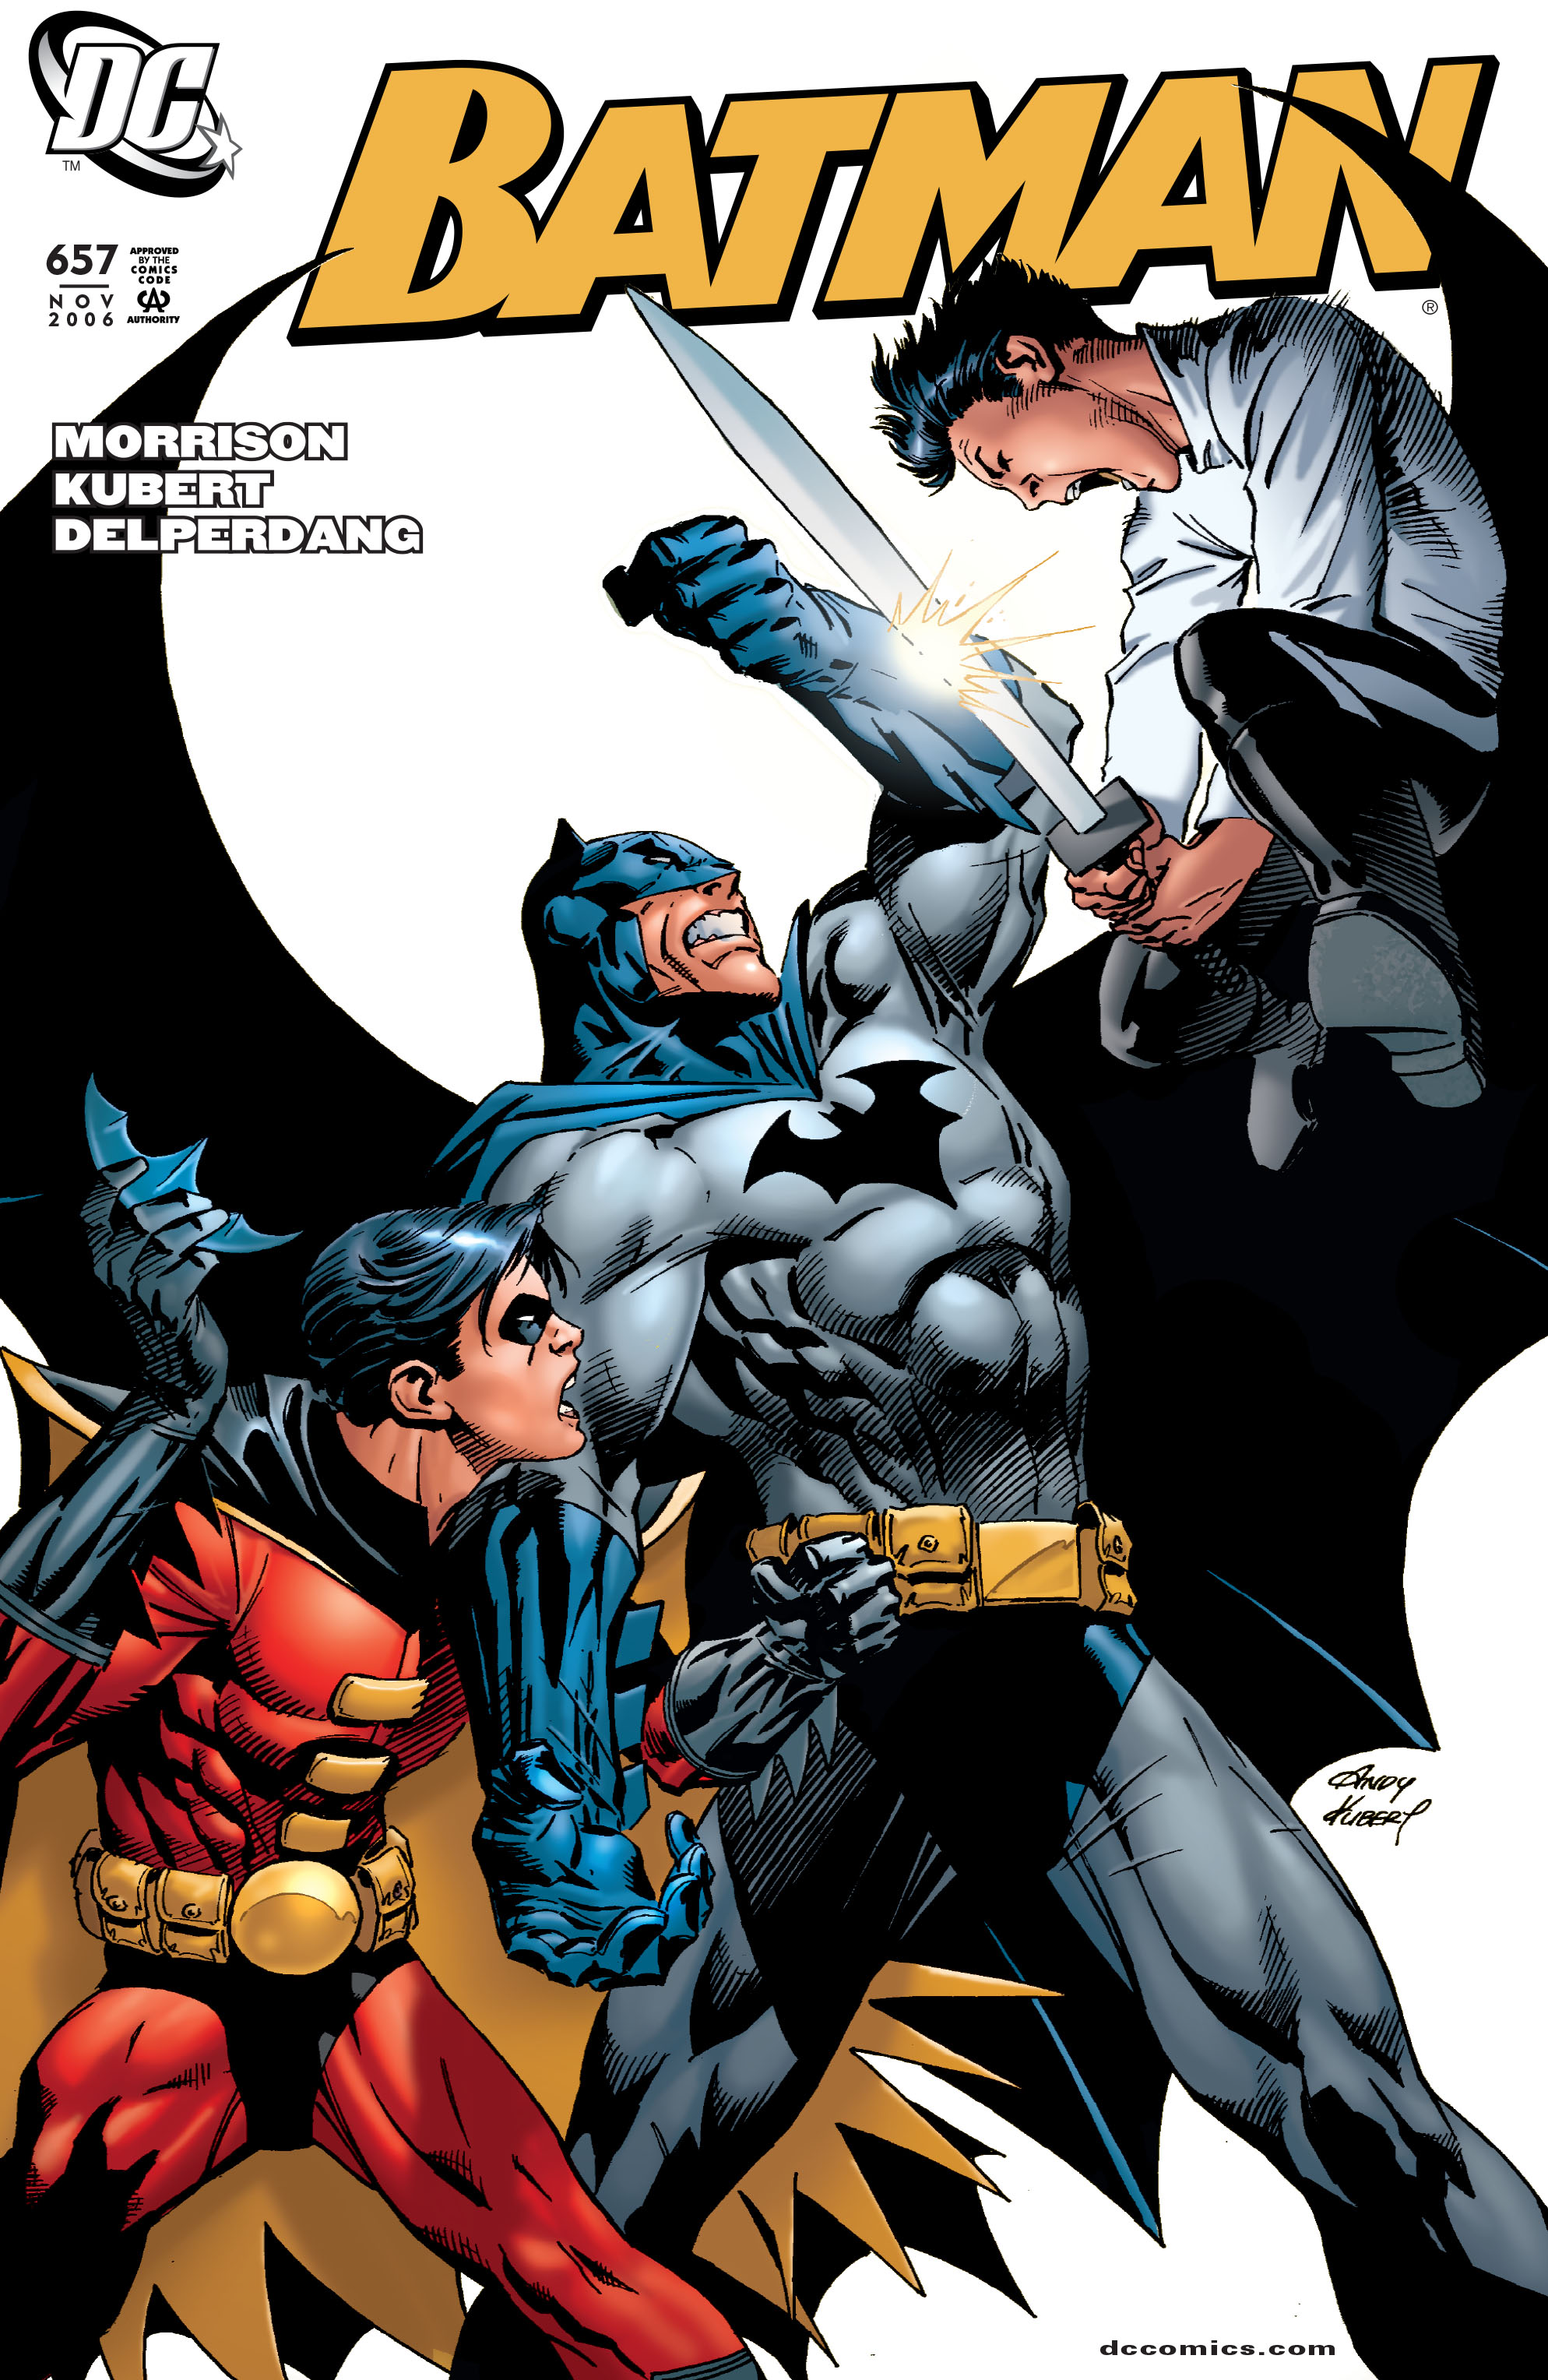 Batman 1940 Issue 657 | Read Batman 1940 Issue 657 comic online in high  quality. Read Full Comic online for free - Read comics online in high  quality .| READ COMIC ONLINE